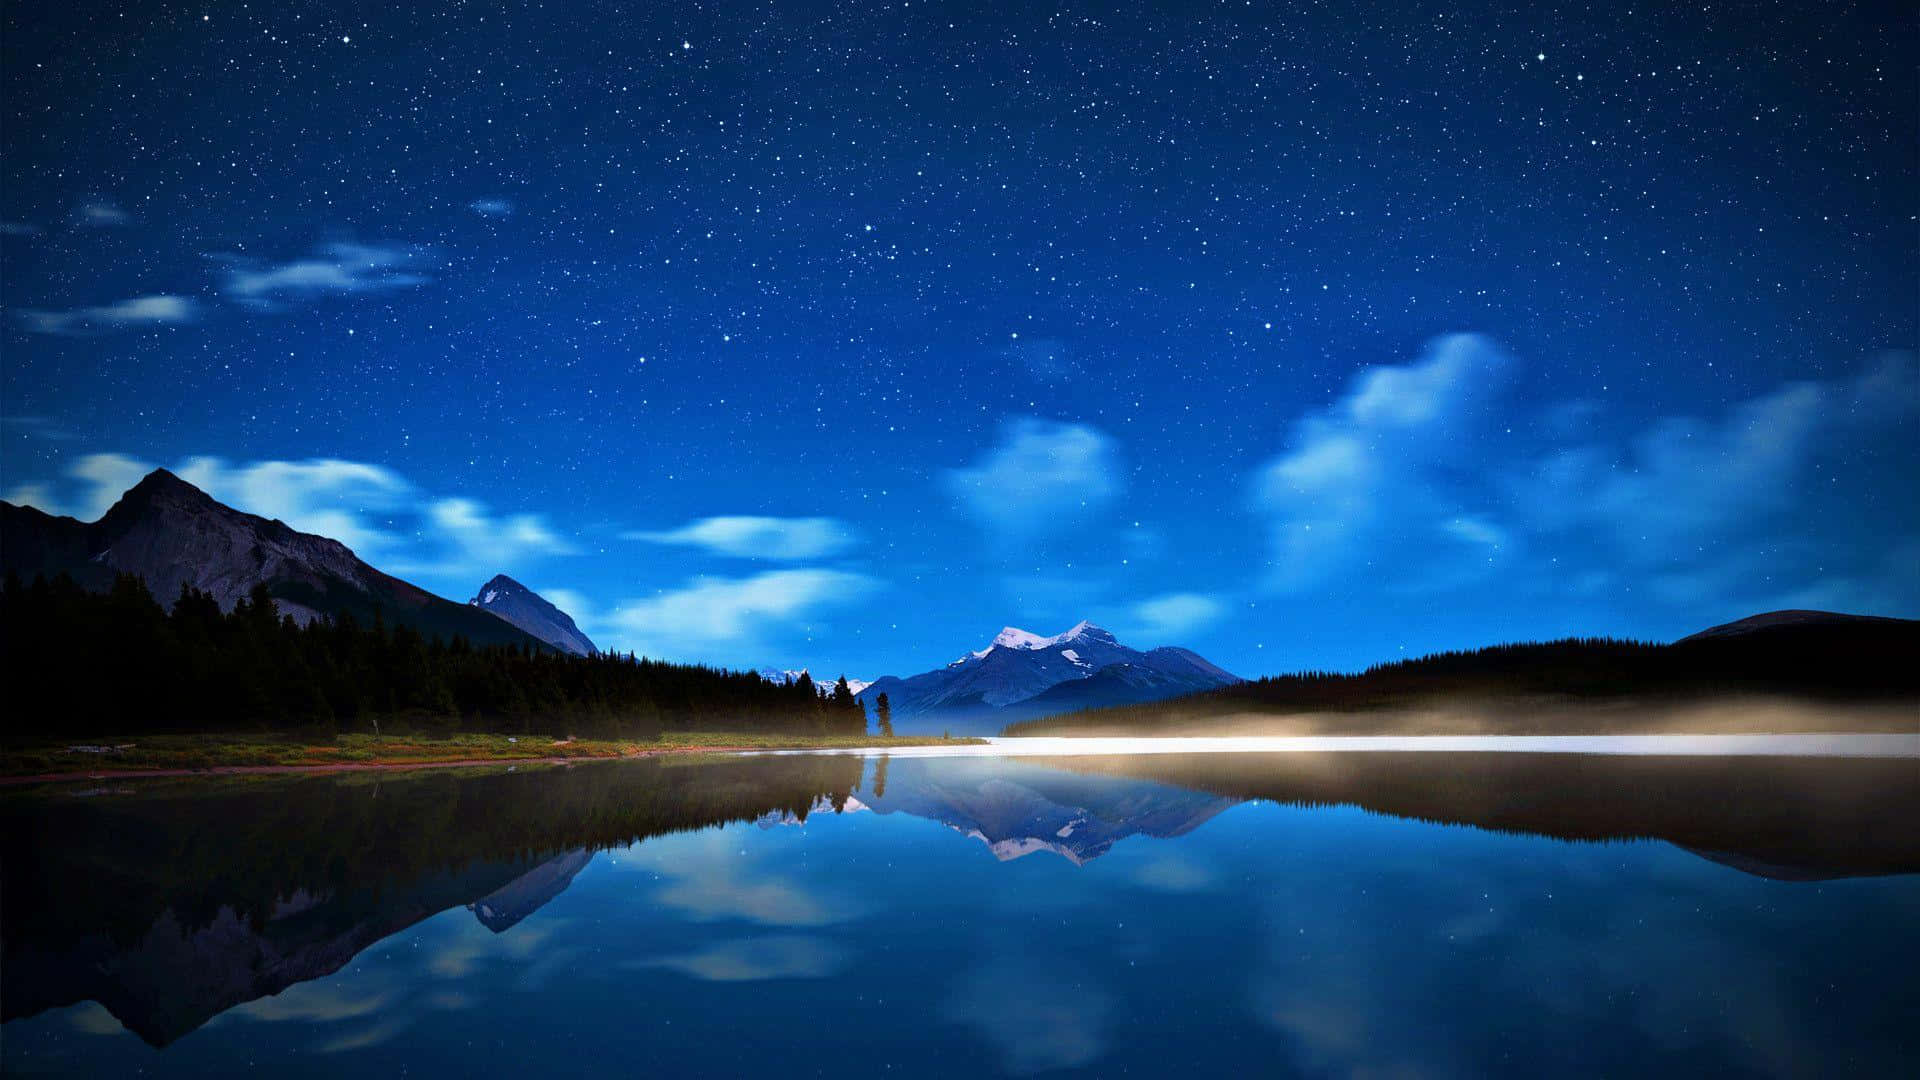 Starry Night Sky Over Tranquil Lake